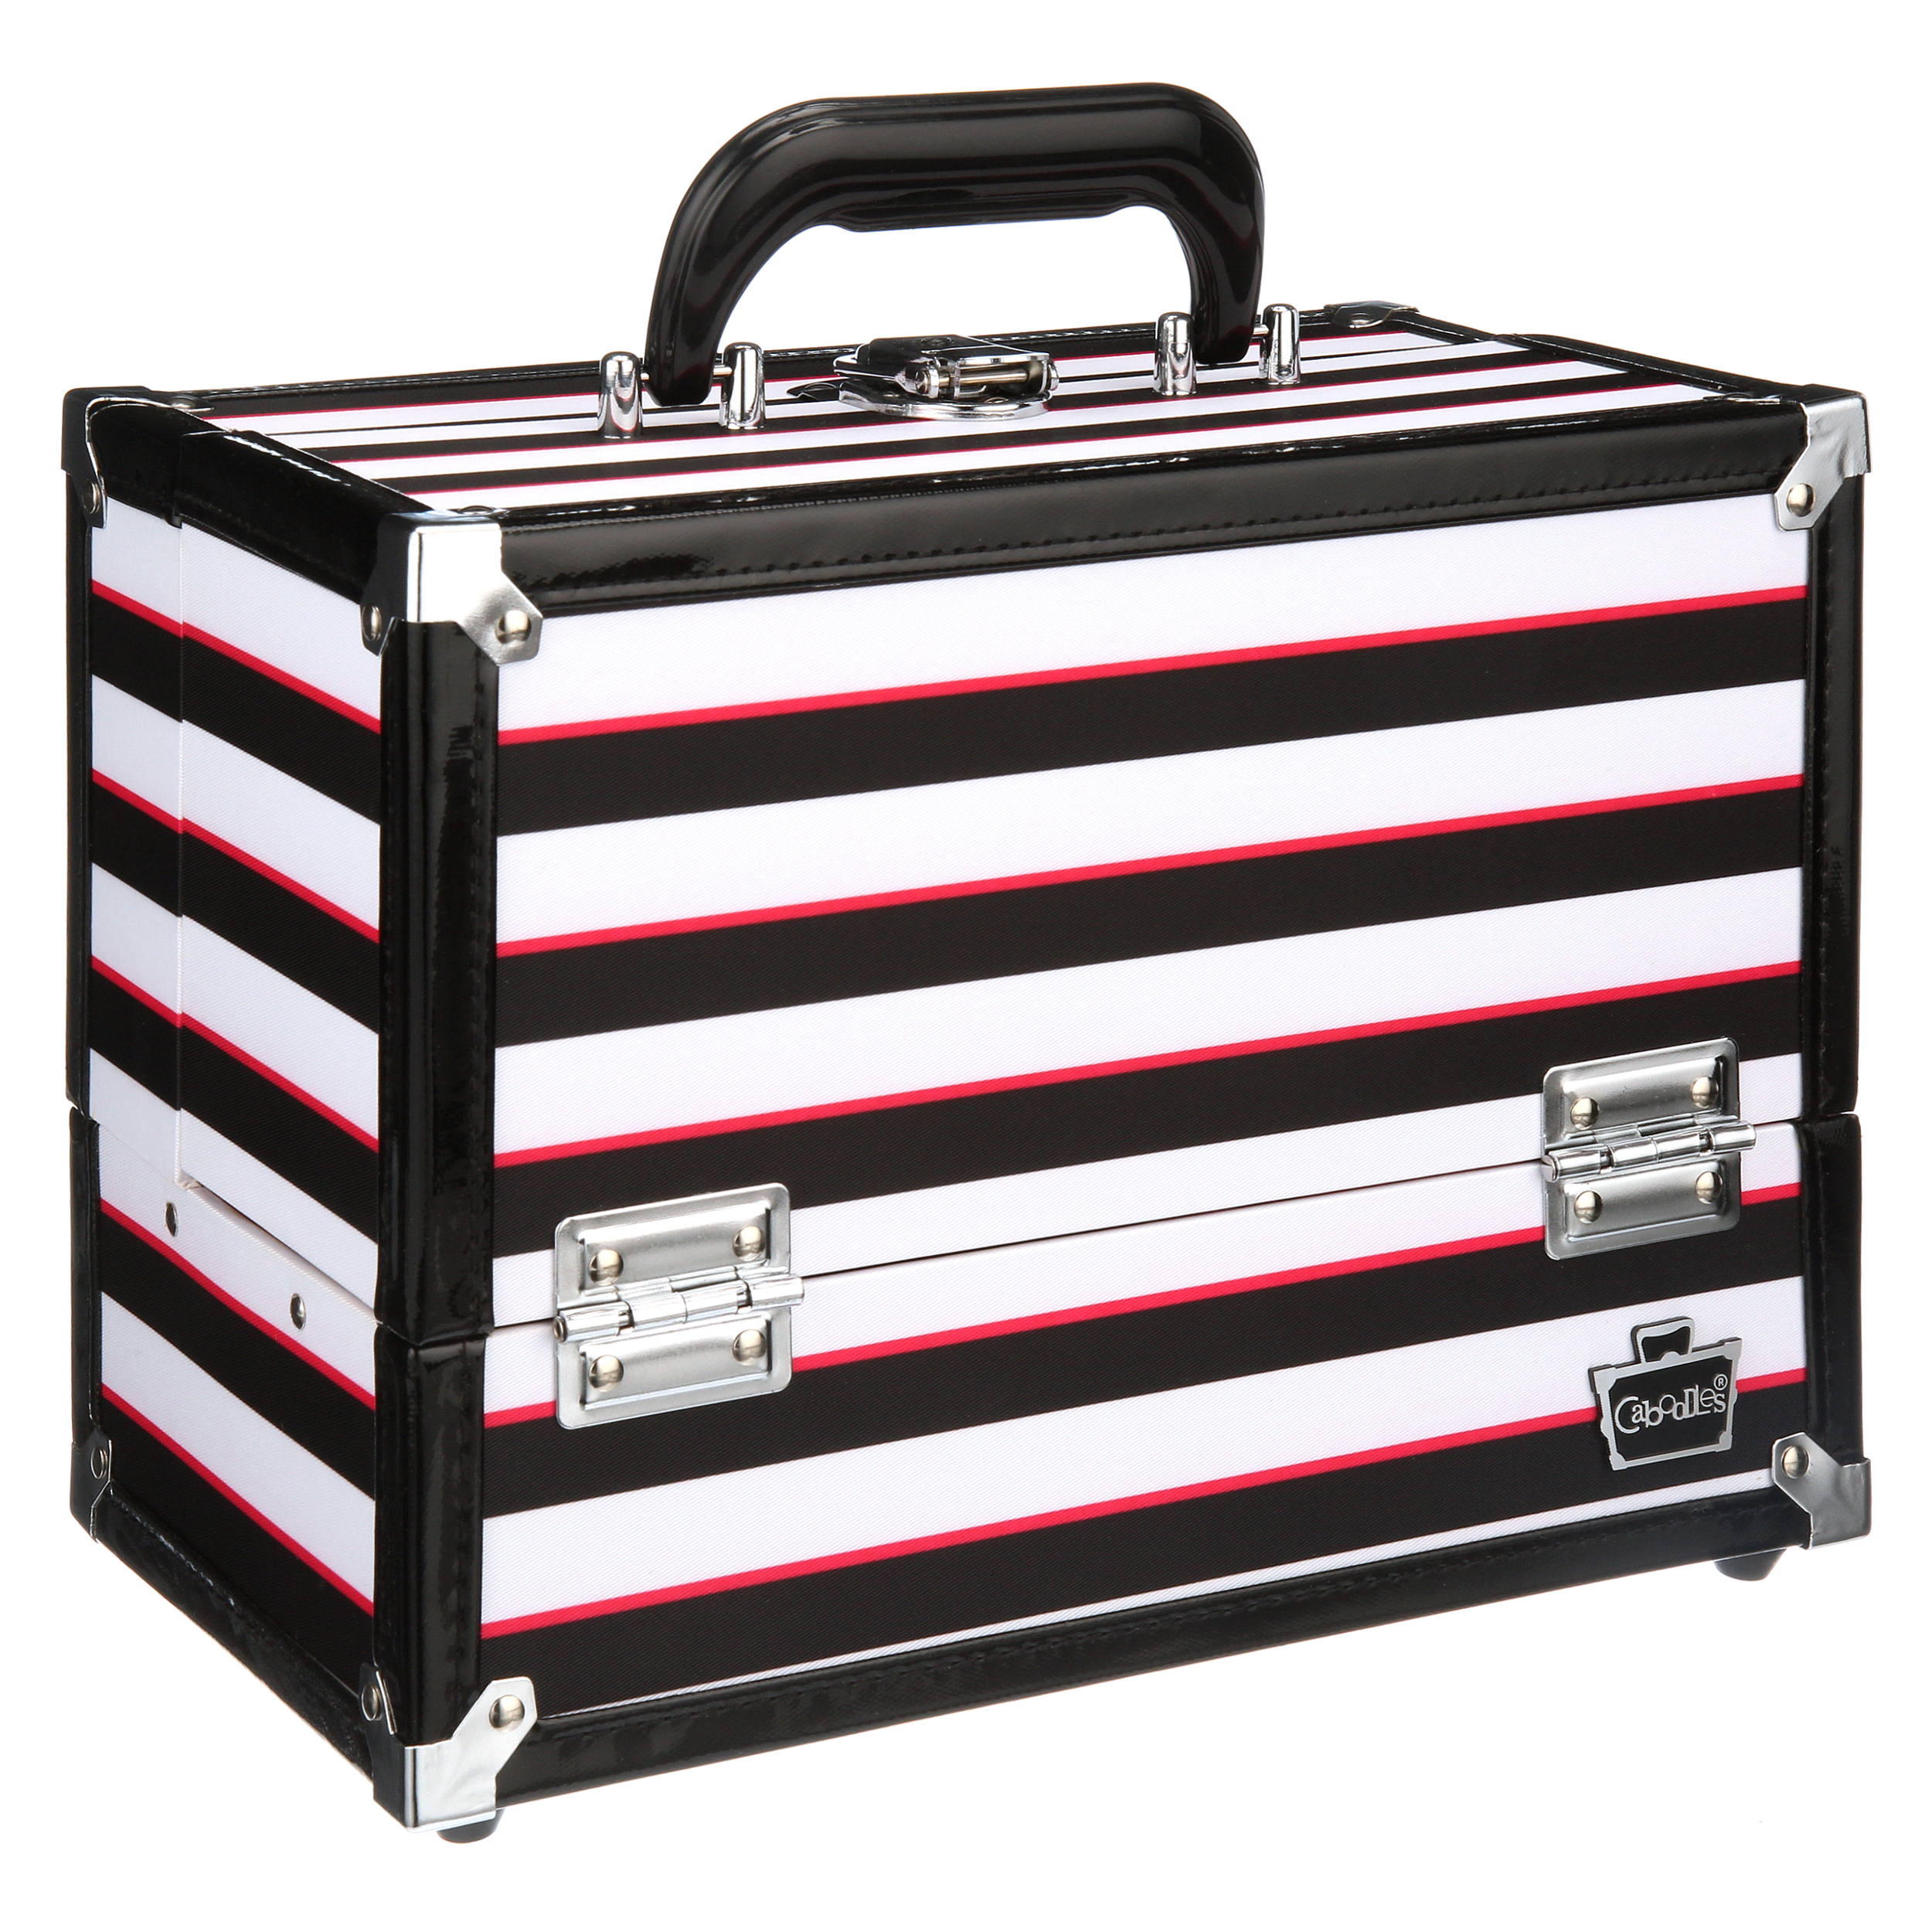 Caboodles Inspired Makeup Case, 2 Tray, Multi Color Striped - image 5 of 7